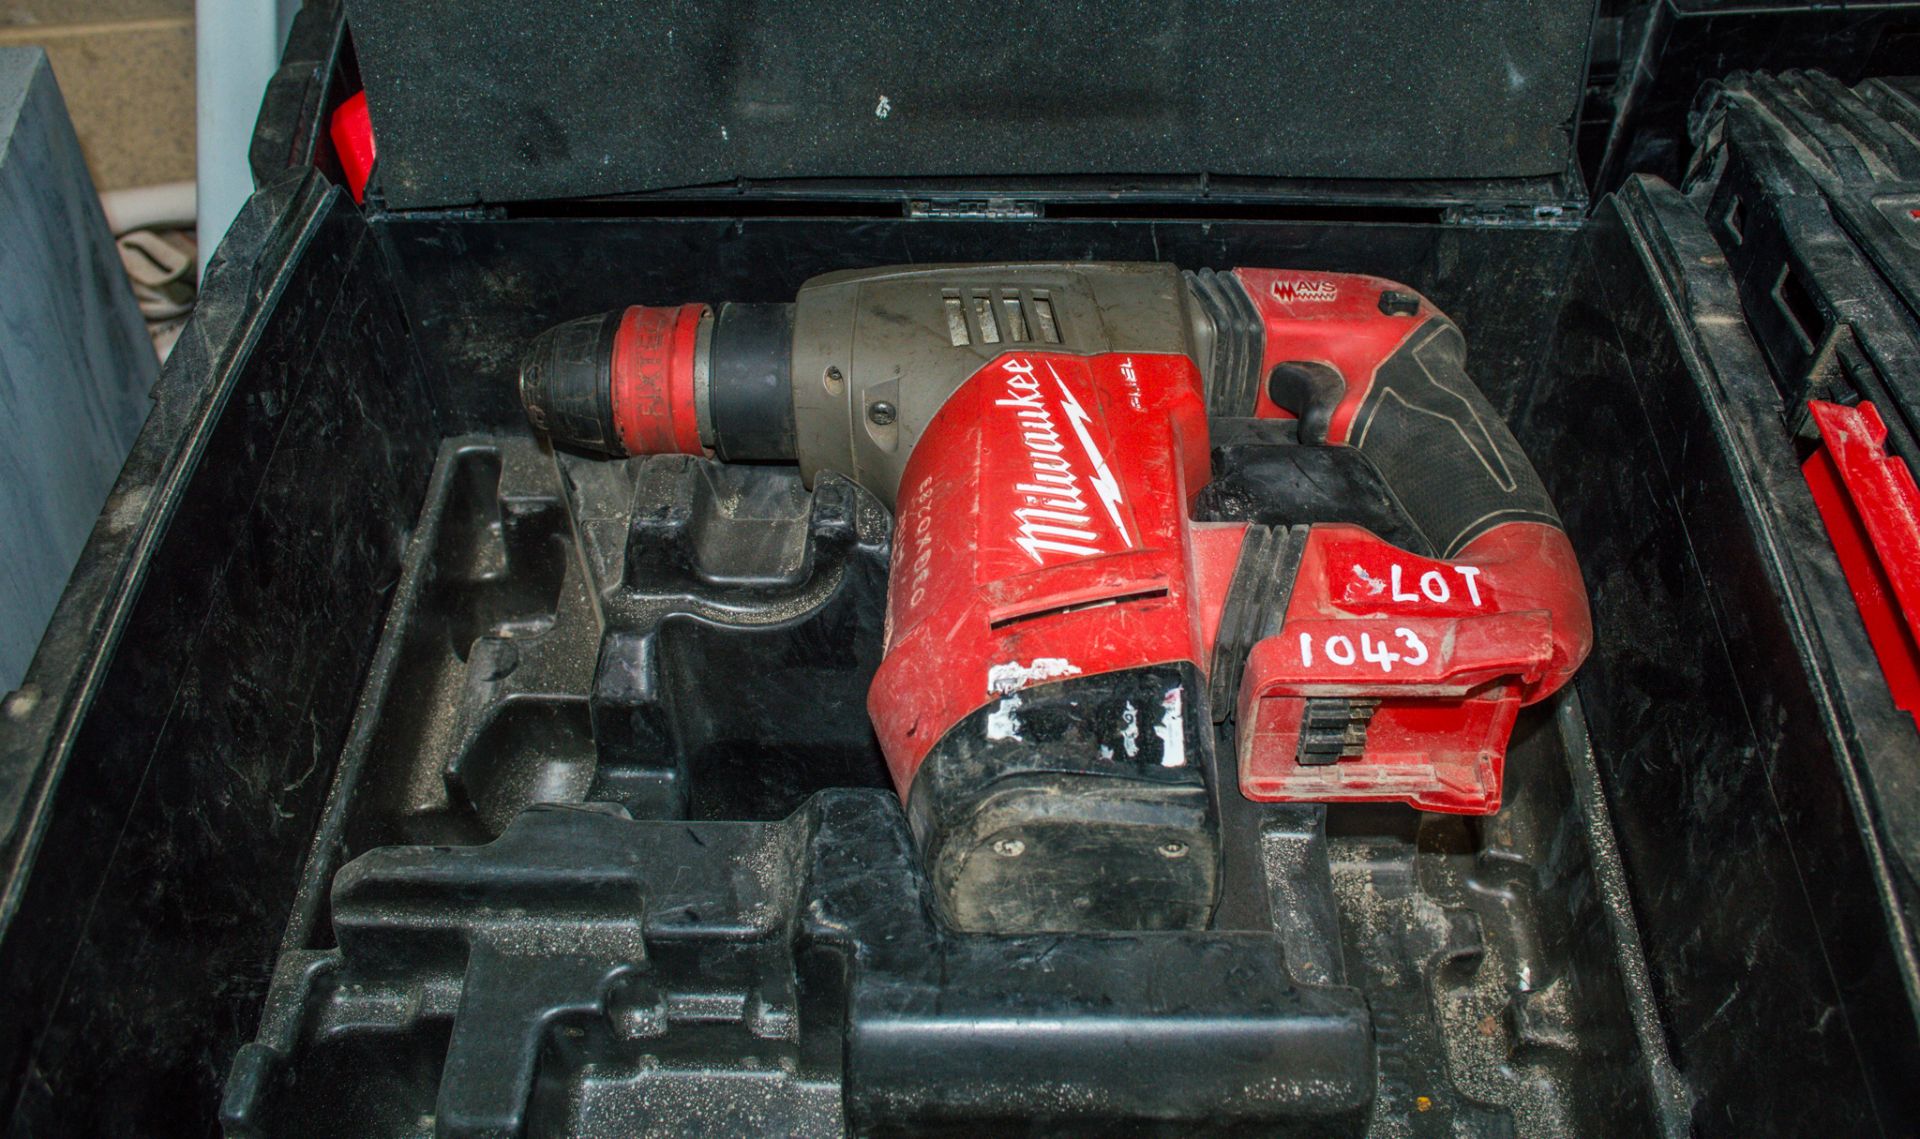 Milwaukee 18v cordless SDS rotary hammer drill c/w carry case ** No battery or charger ** D3BX0283